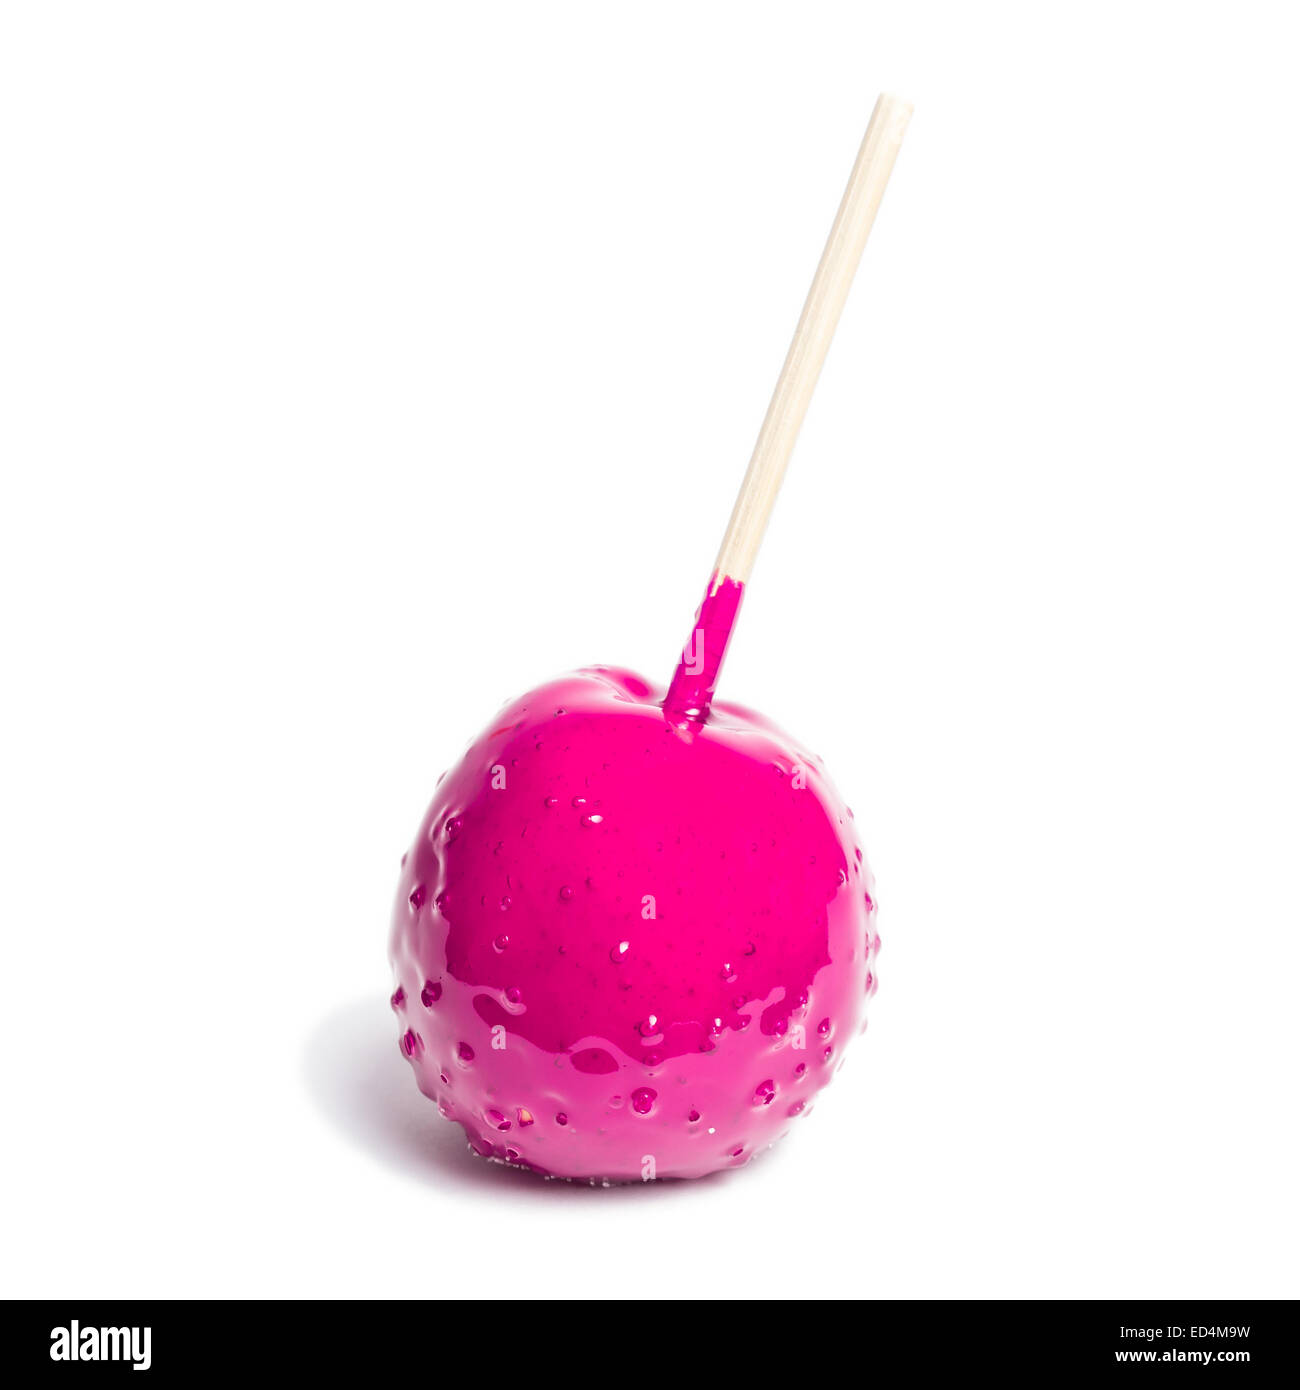 toffee apple pink on white background Stock Photo